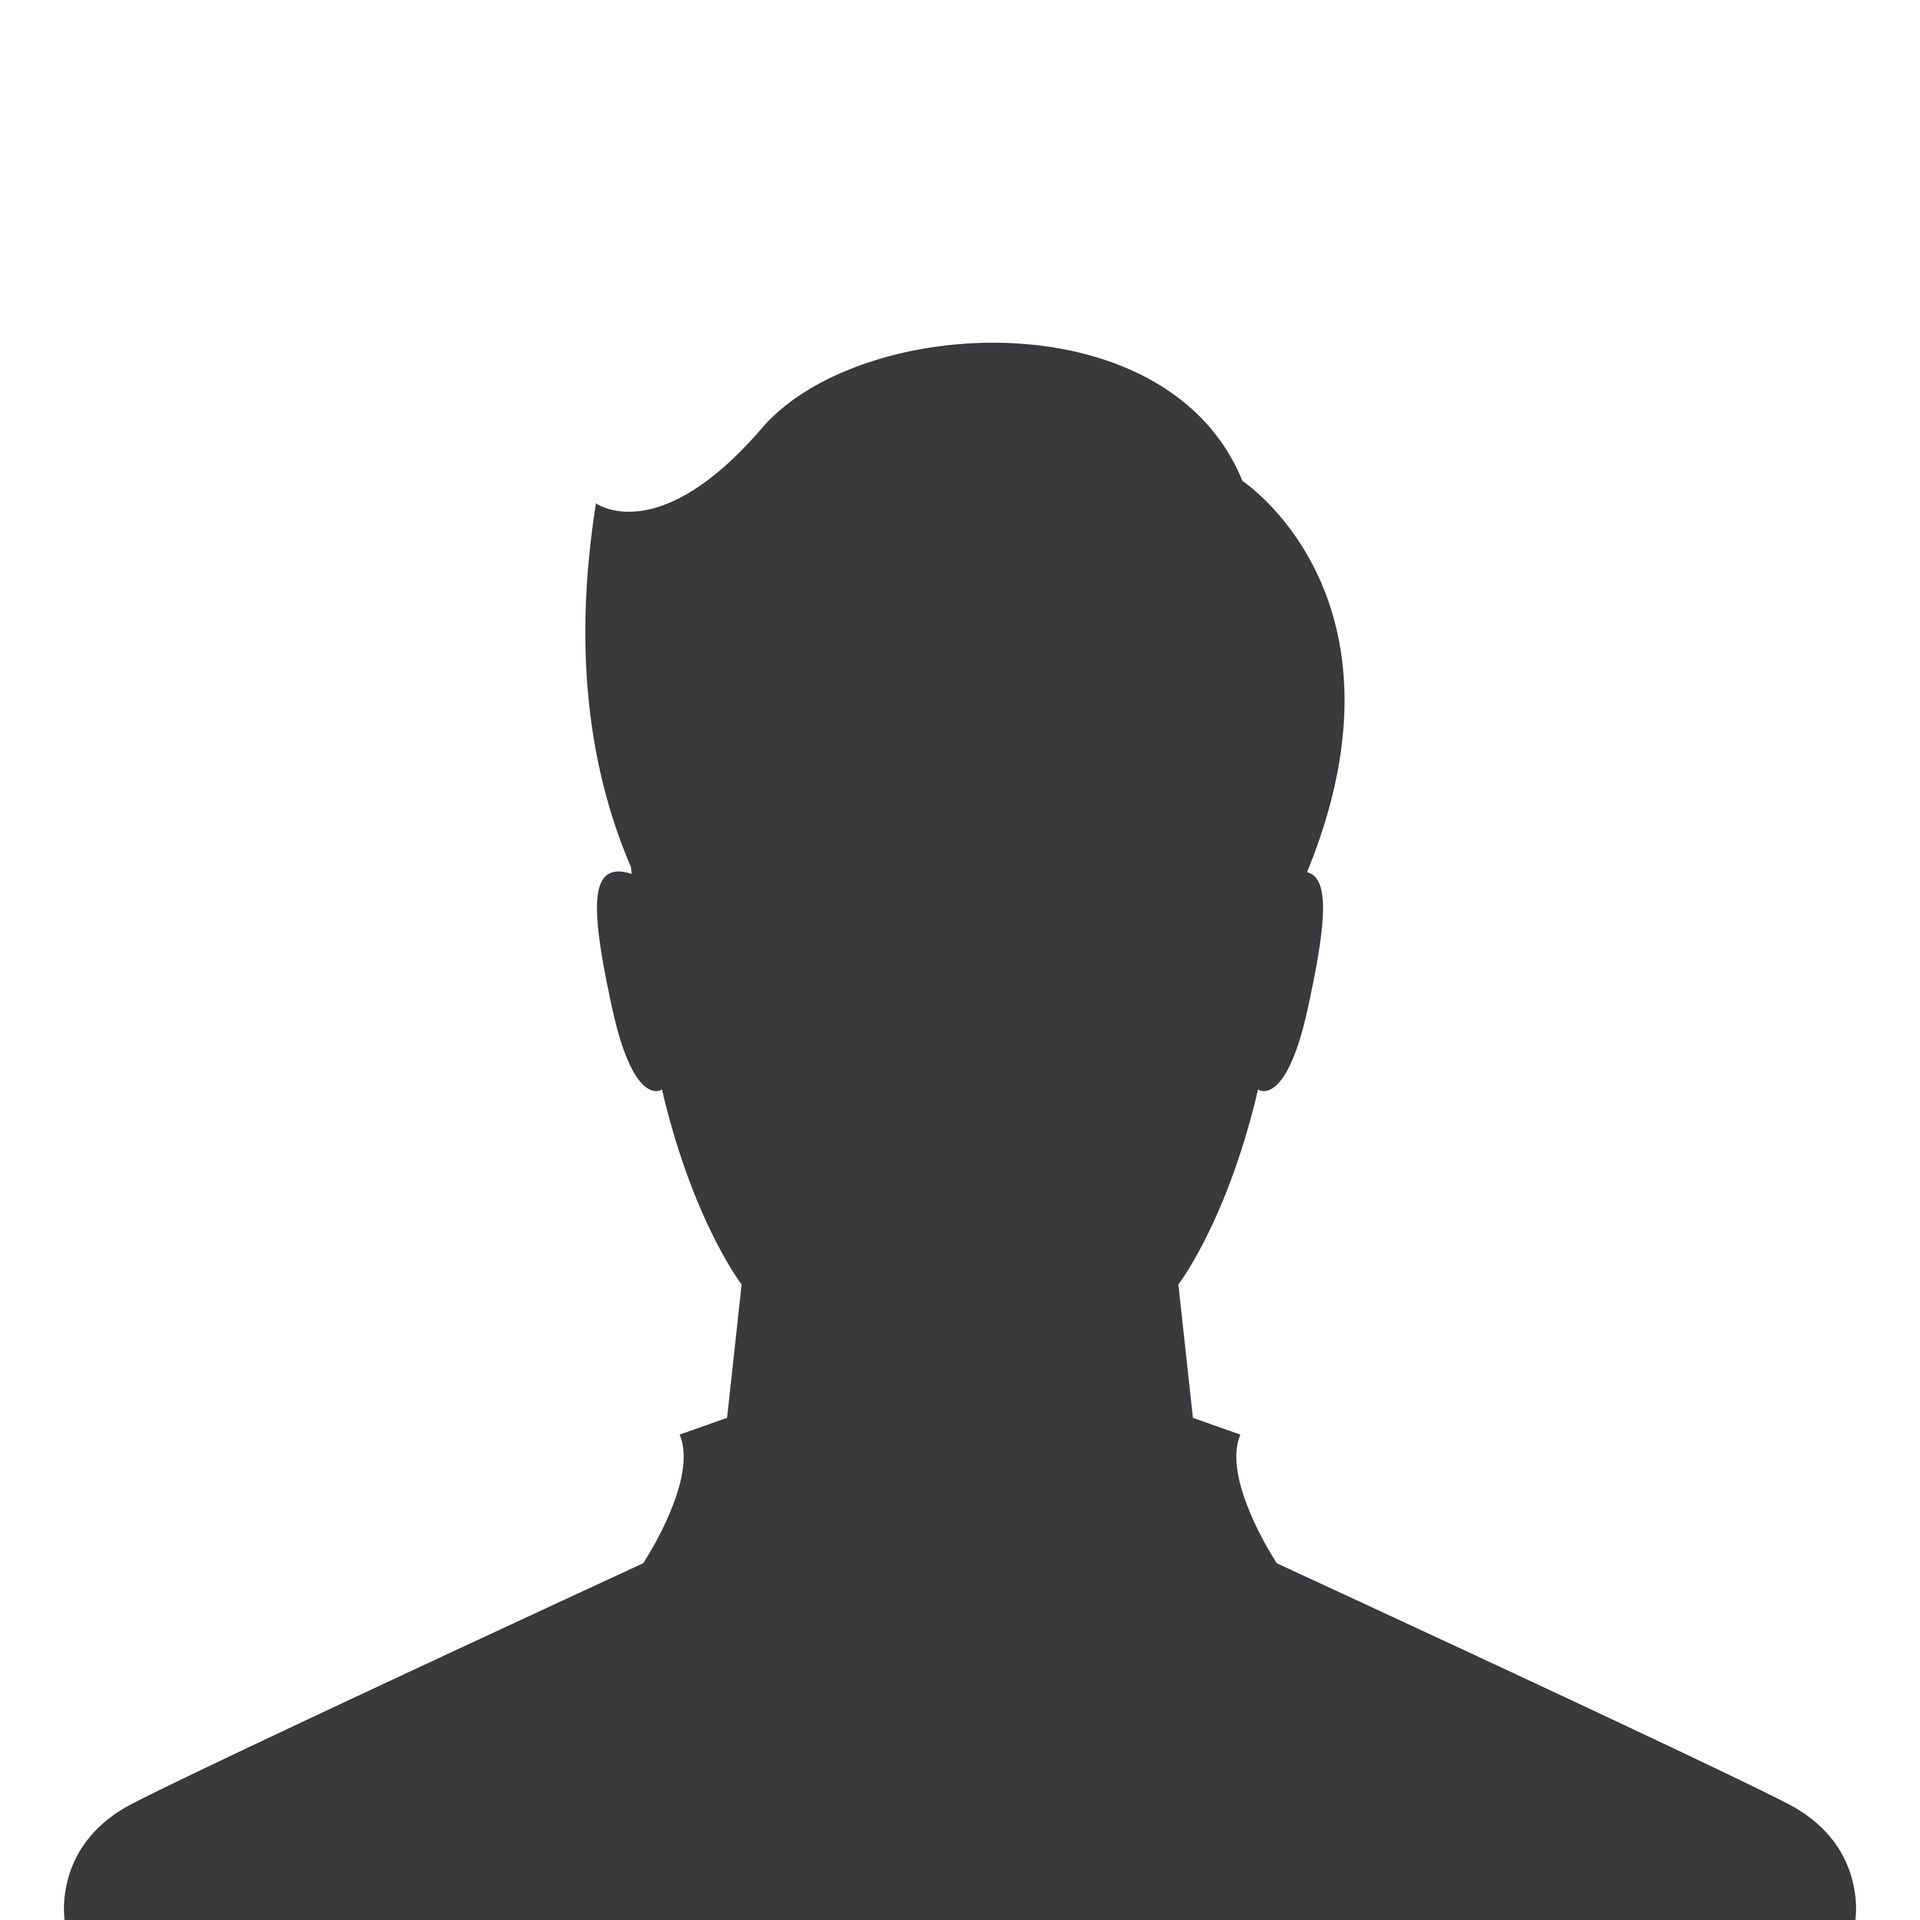 A silhouette of a man without a face on a white background.